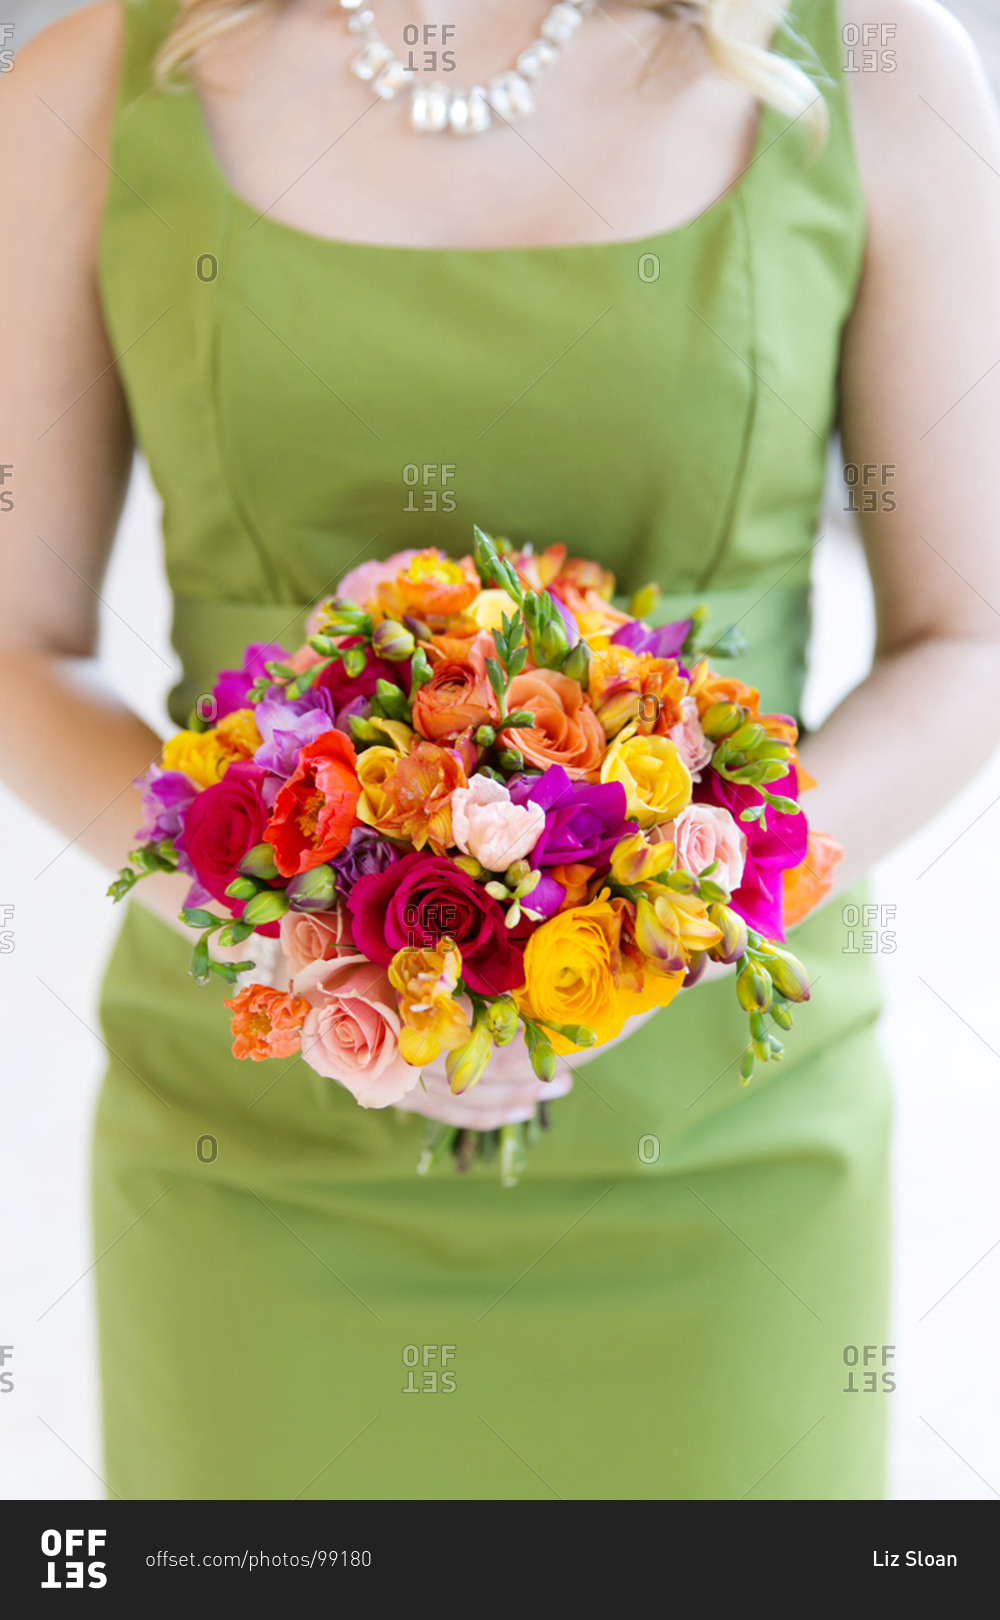 Bridesmaid holding colorful wedding bouquet